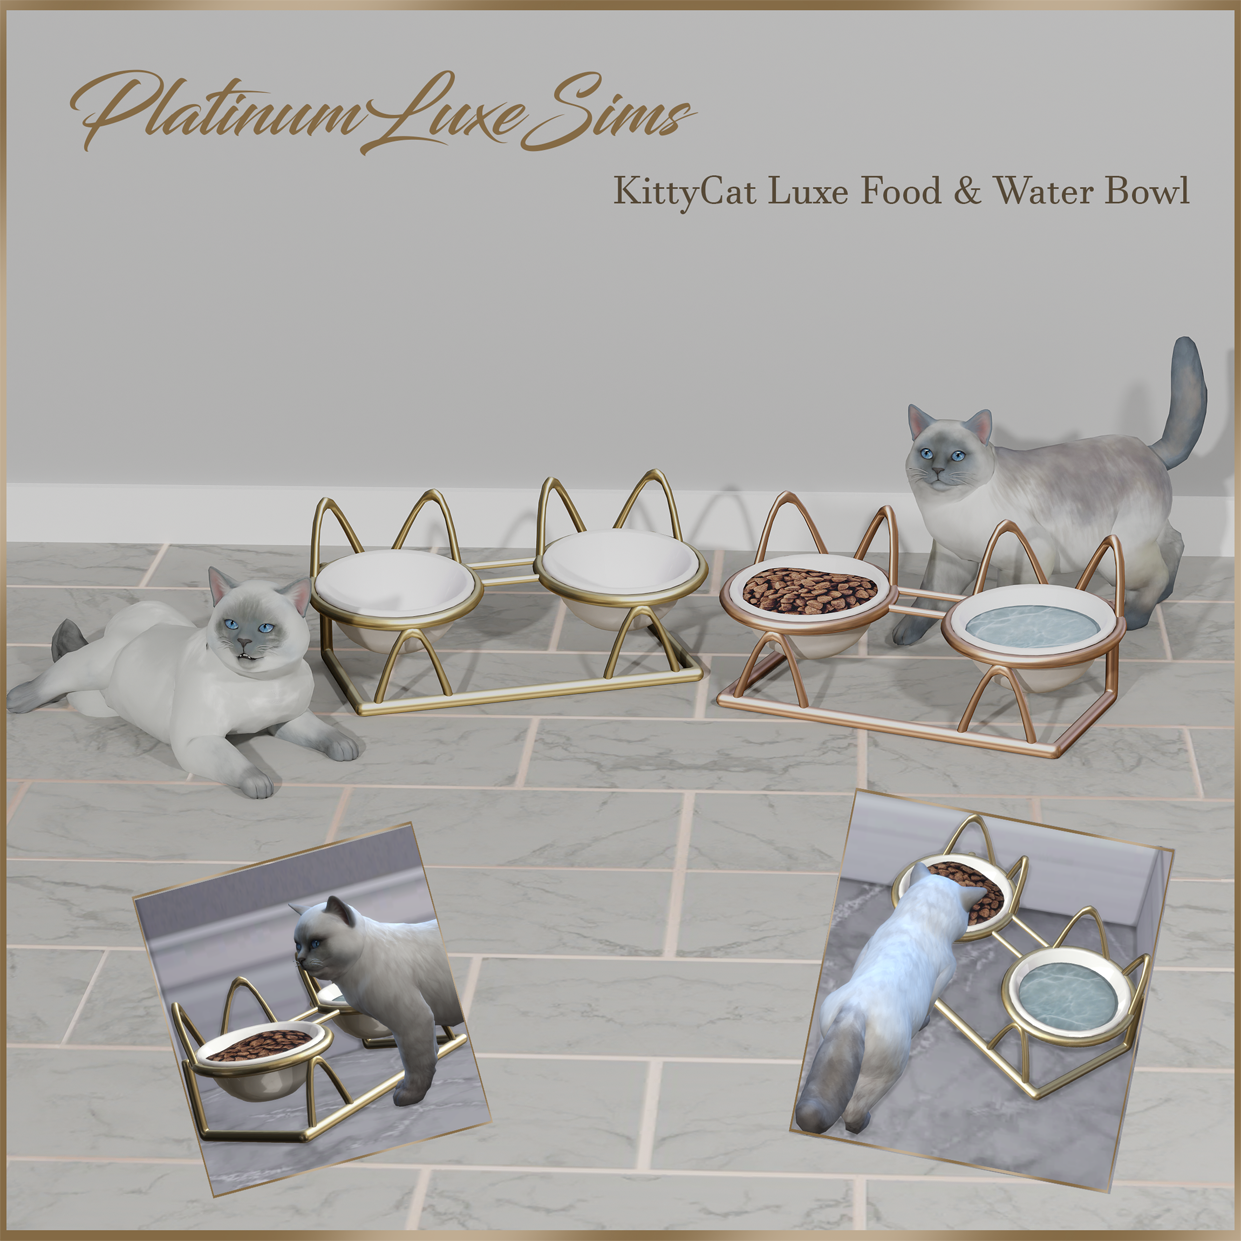 KittyCat Luxe Food & Water Bowl project avatar